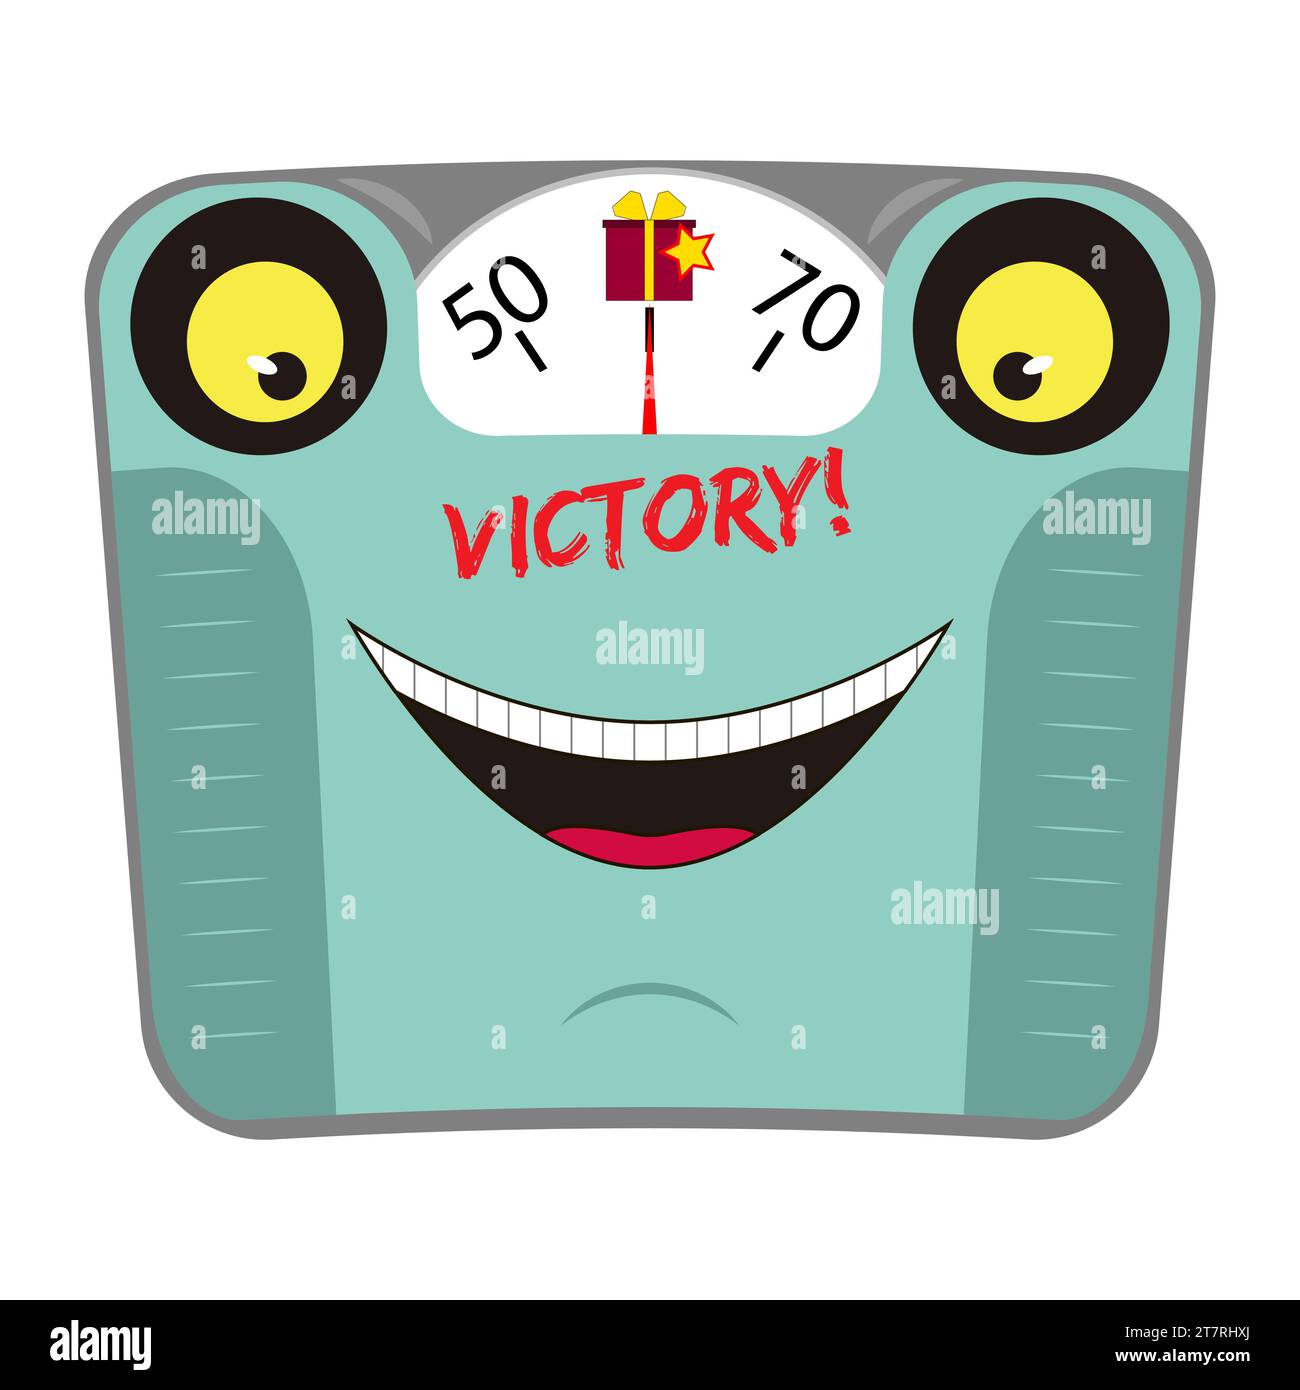 https://c8.alamy.com/comp/2T7RHXJ/funny-mechanical-bathroom-scale-with-face-and-smile-victory-over-excess-weight-concept-healthy-lifestyle-cartoon-character-vector-illustration-2T7RHXJ.jpg